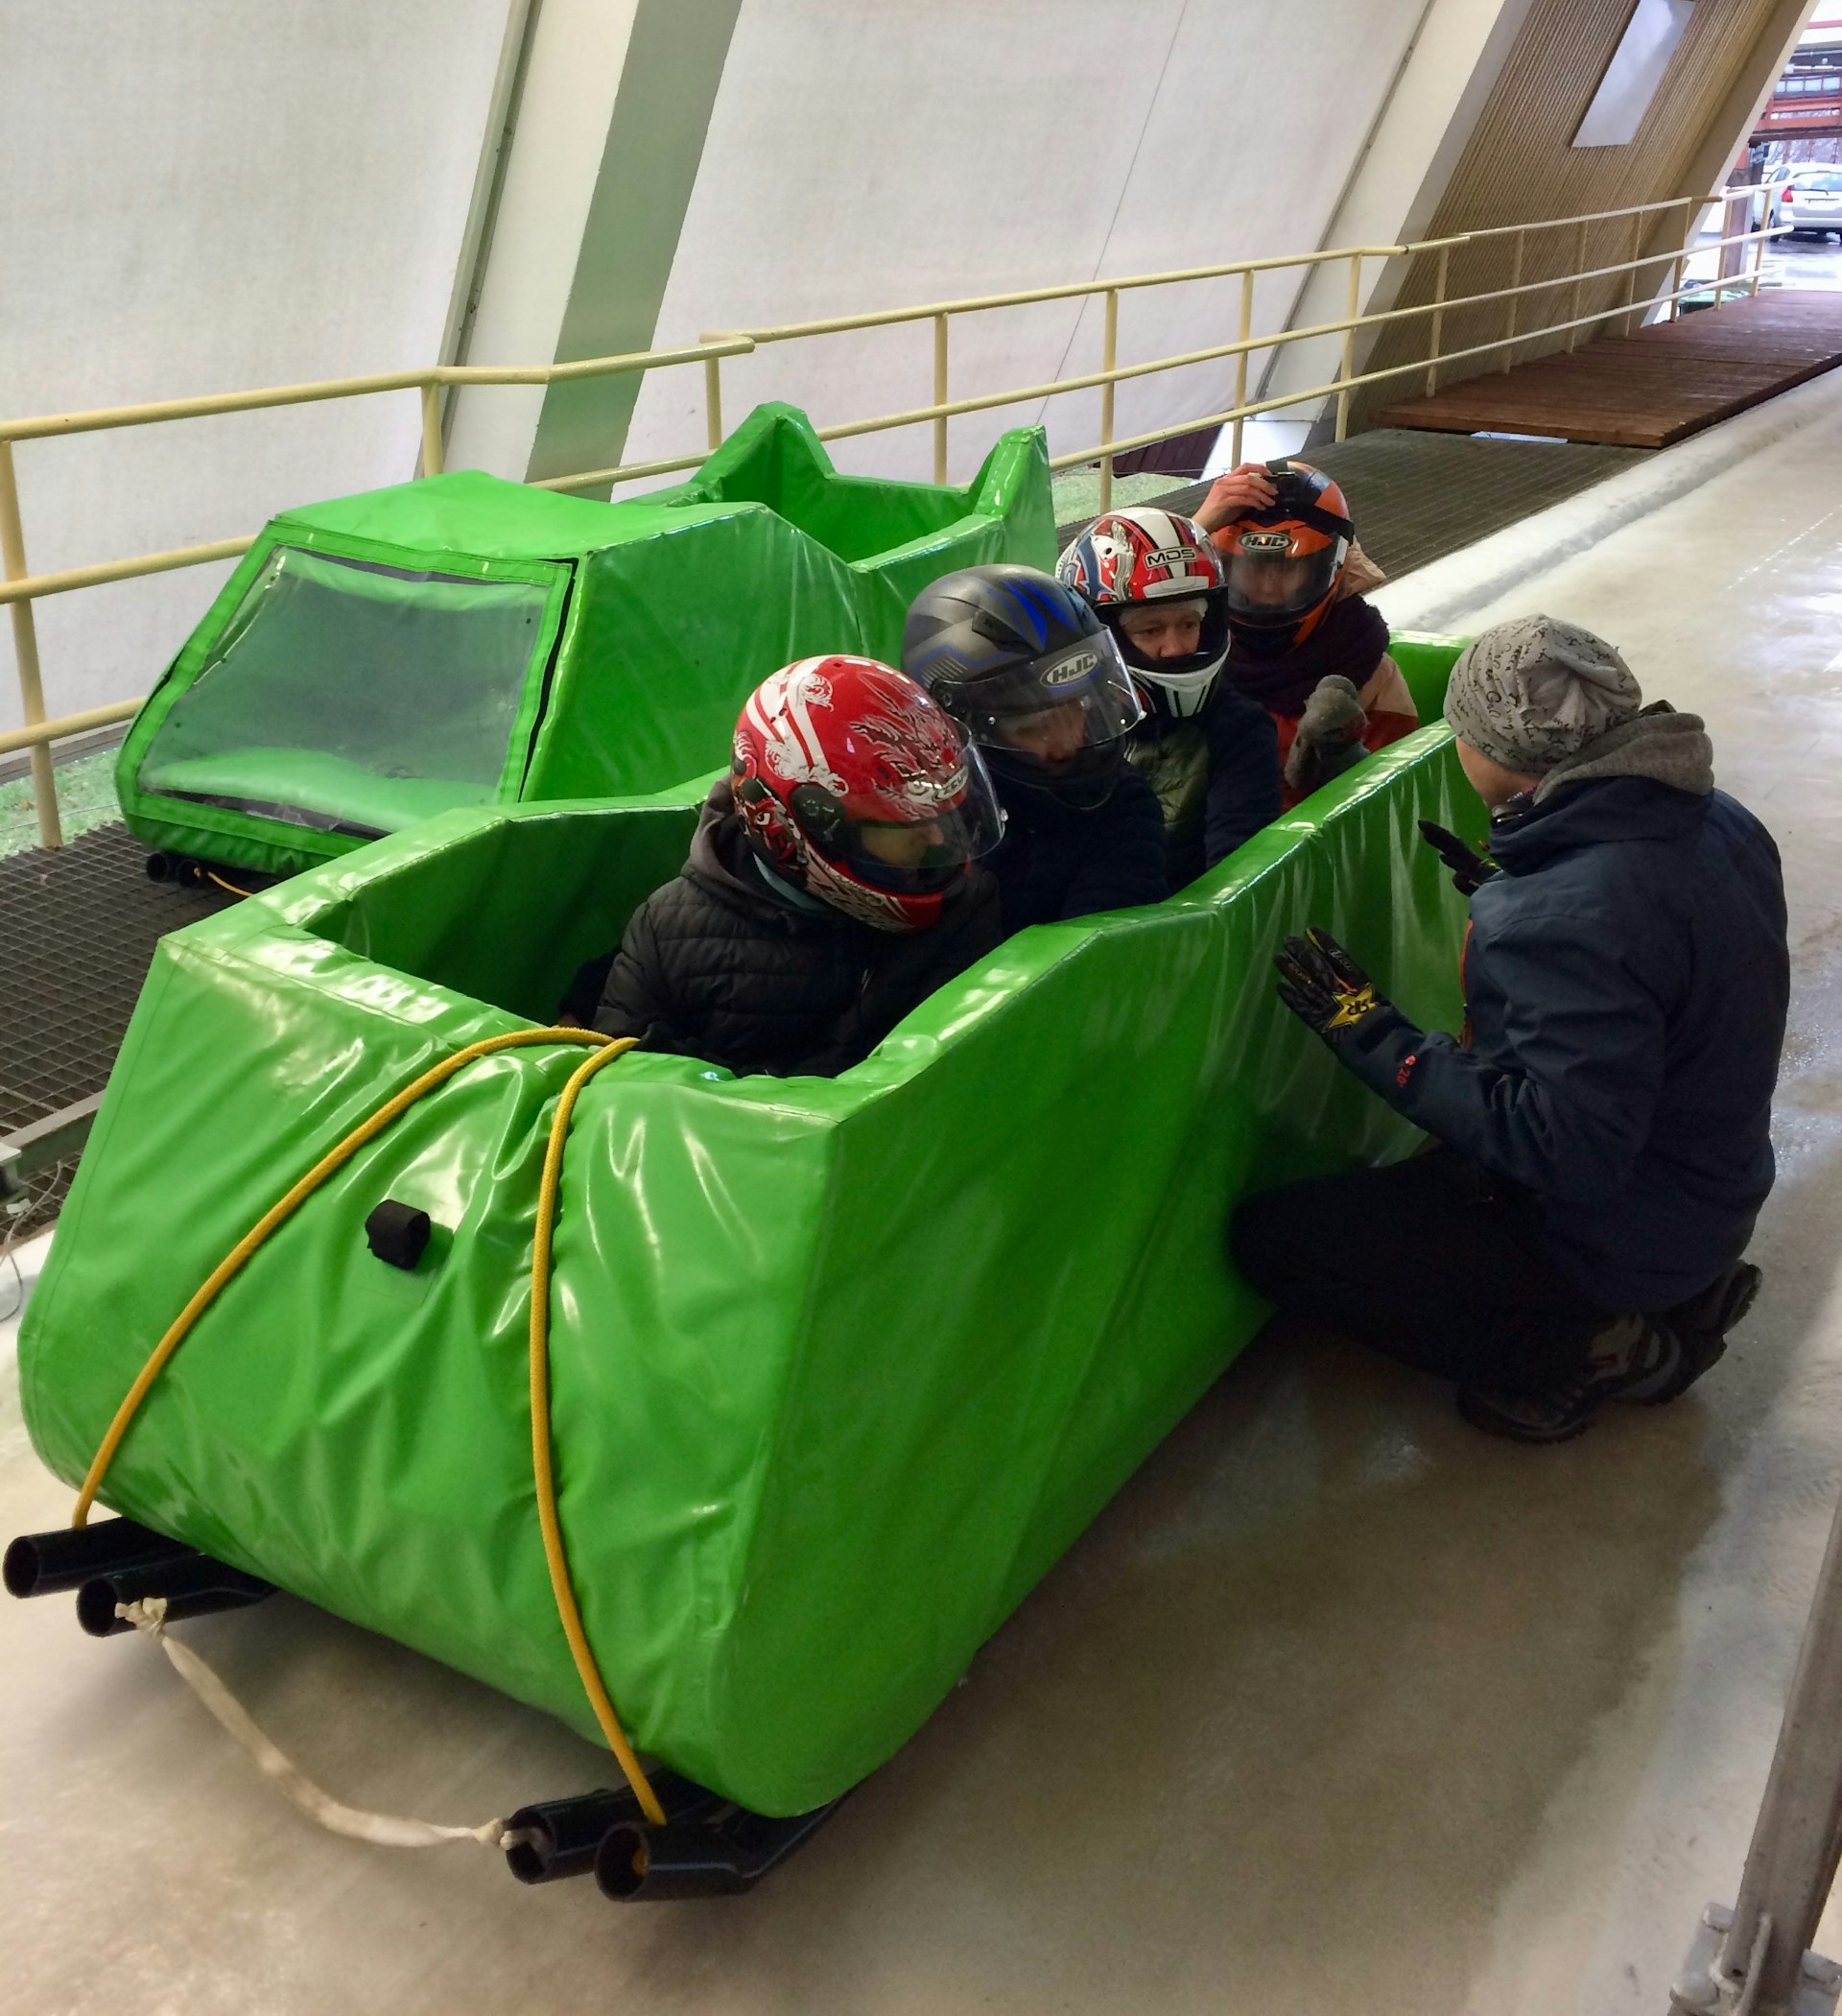 Four people wearing helmets sit in a toboggan-like vehicle which is covered in thick green padding. An instructor kneels nearby